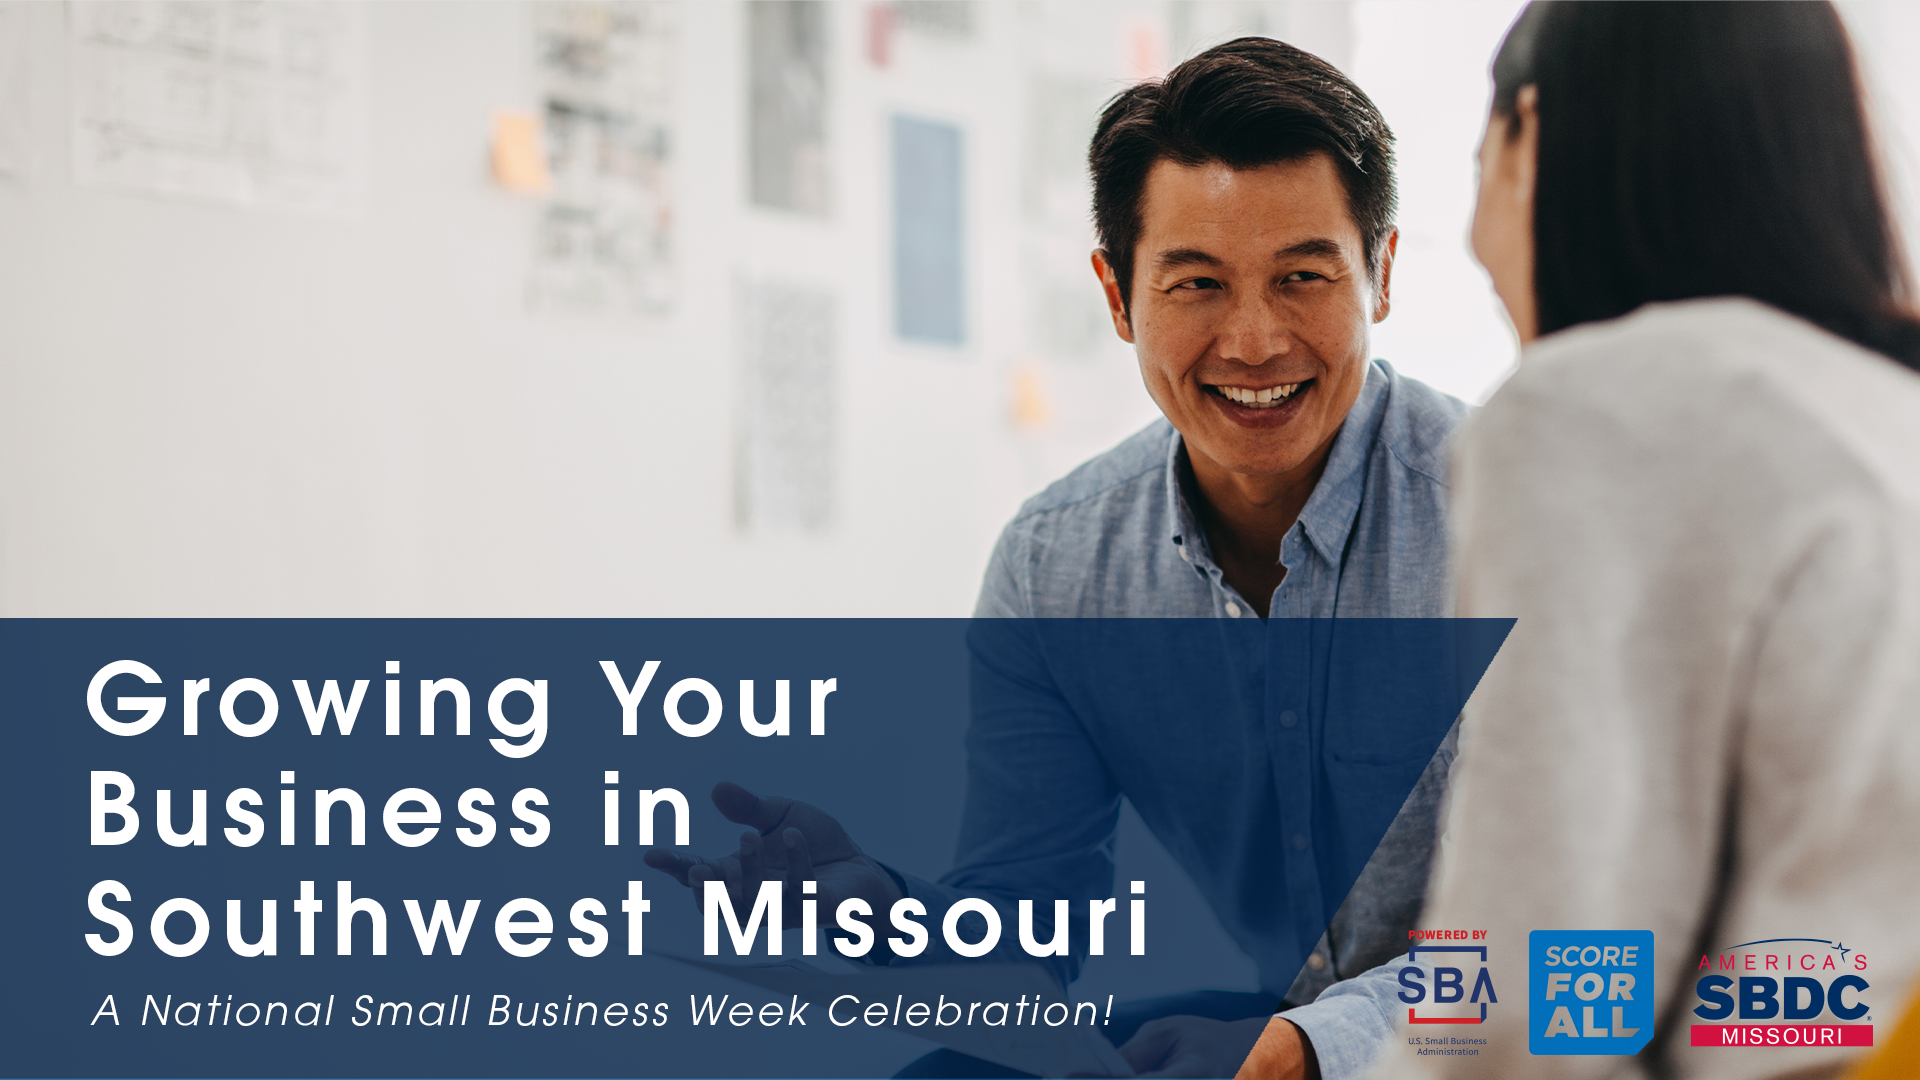 Growing your business in southwest missouri is written on top of picture with two people smiling.